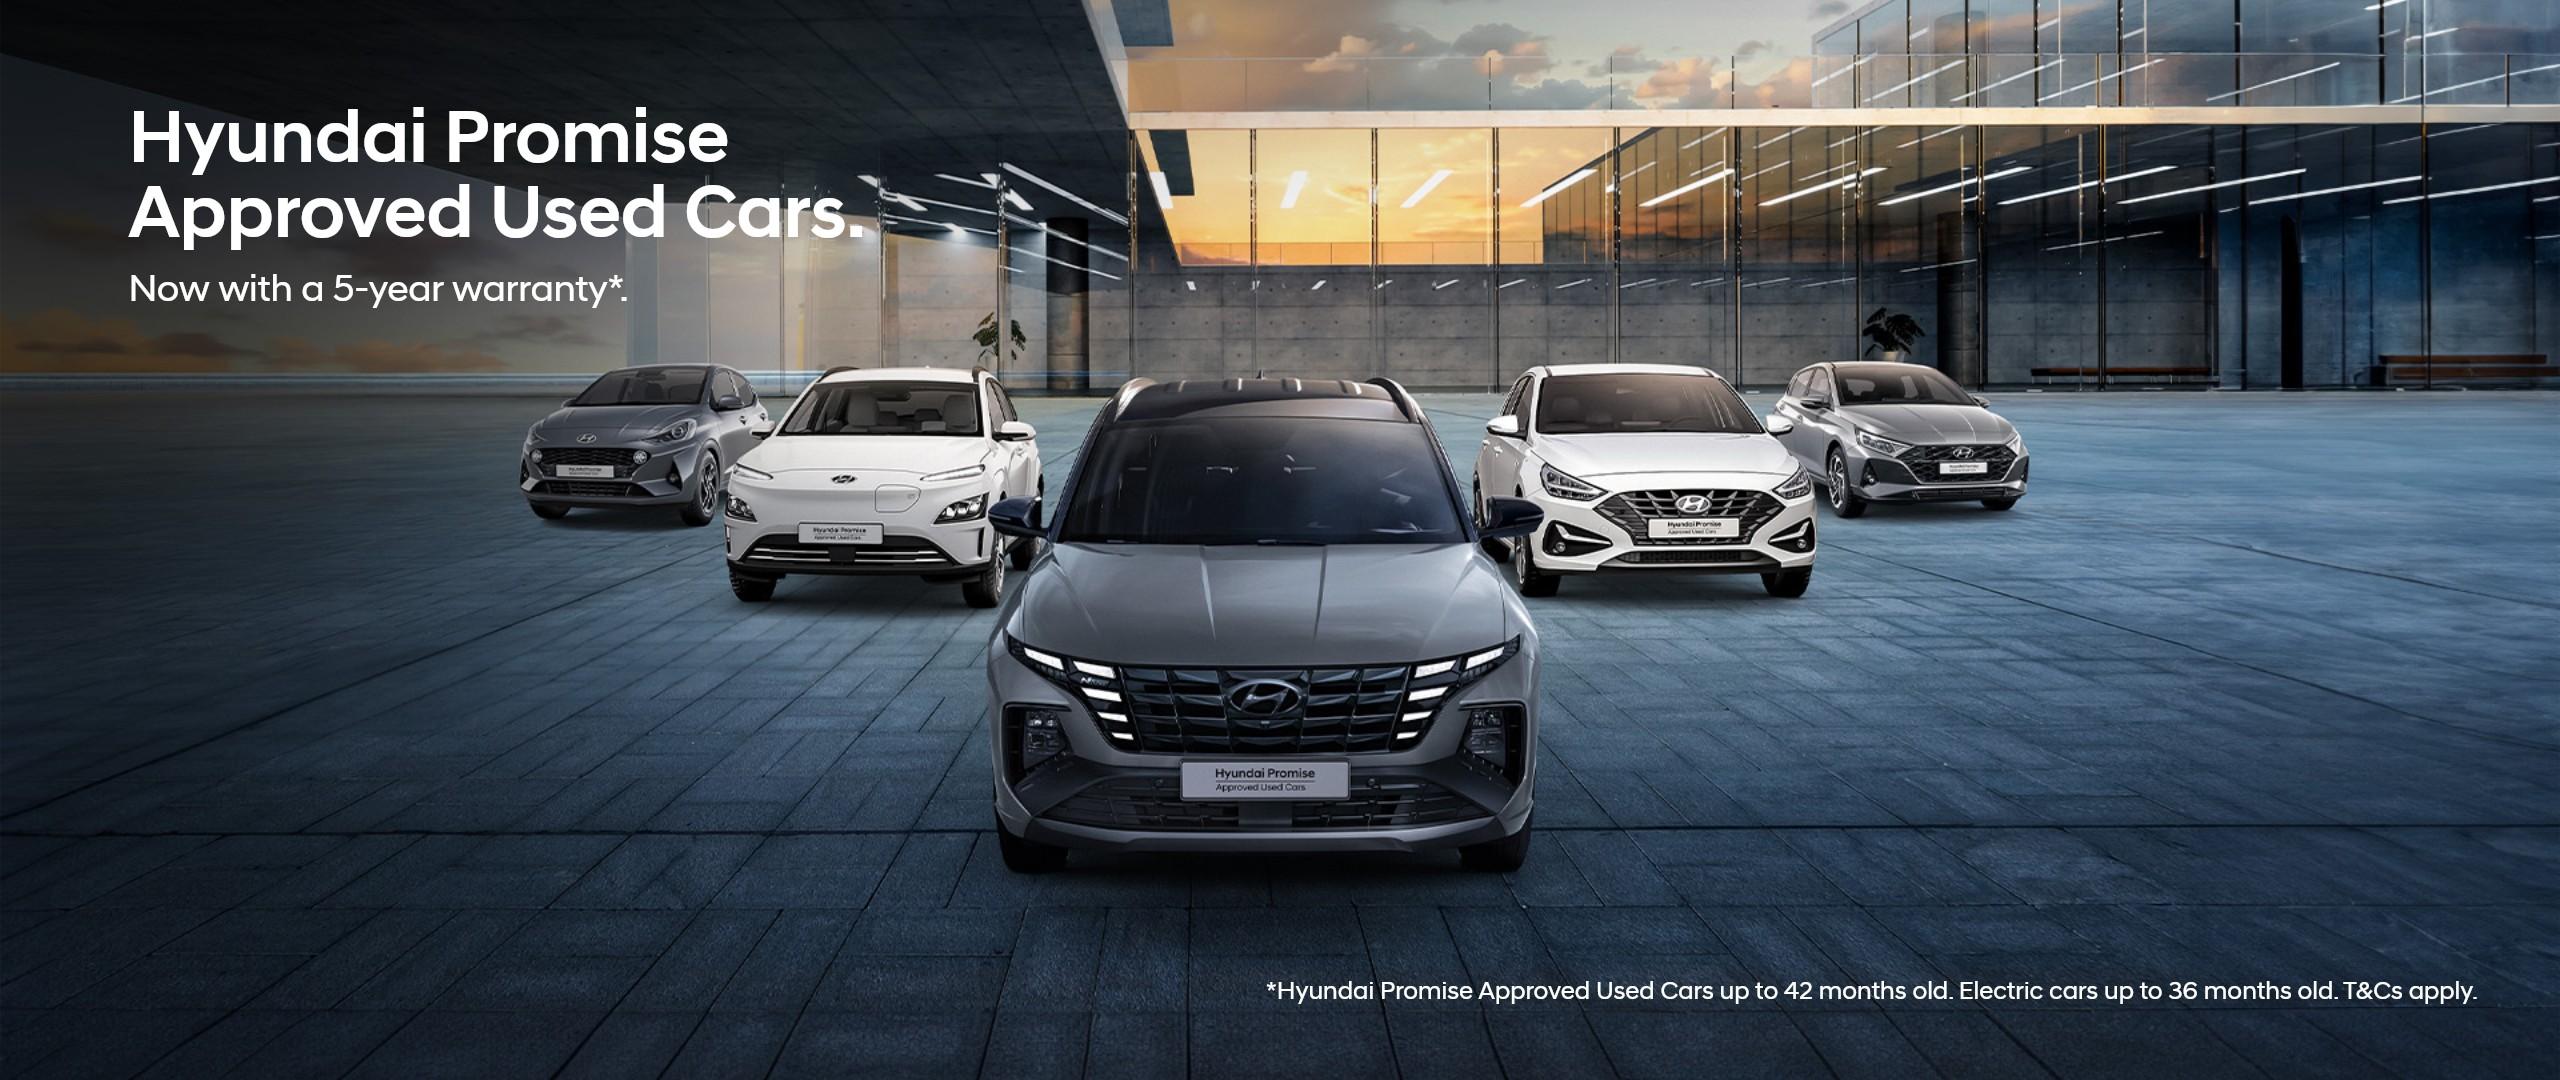 Hyundai Promise - Approved Used Cars